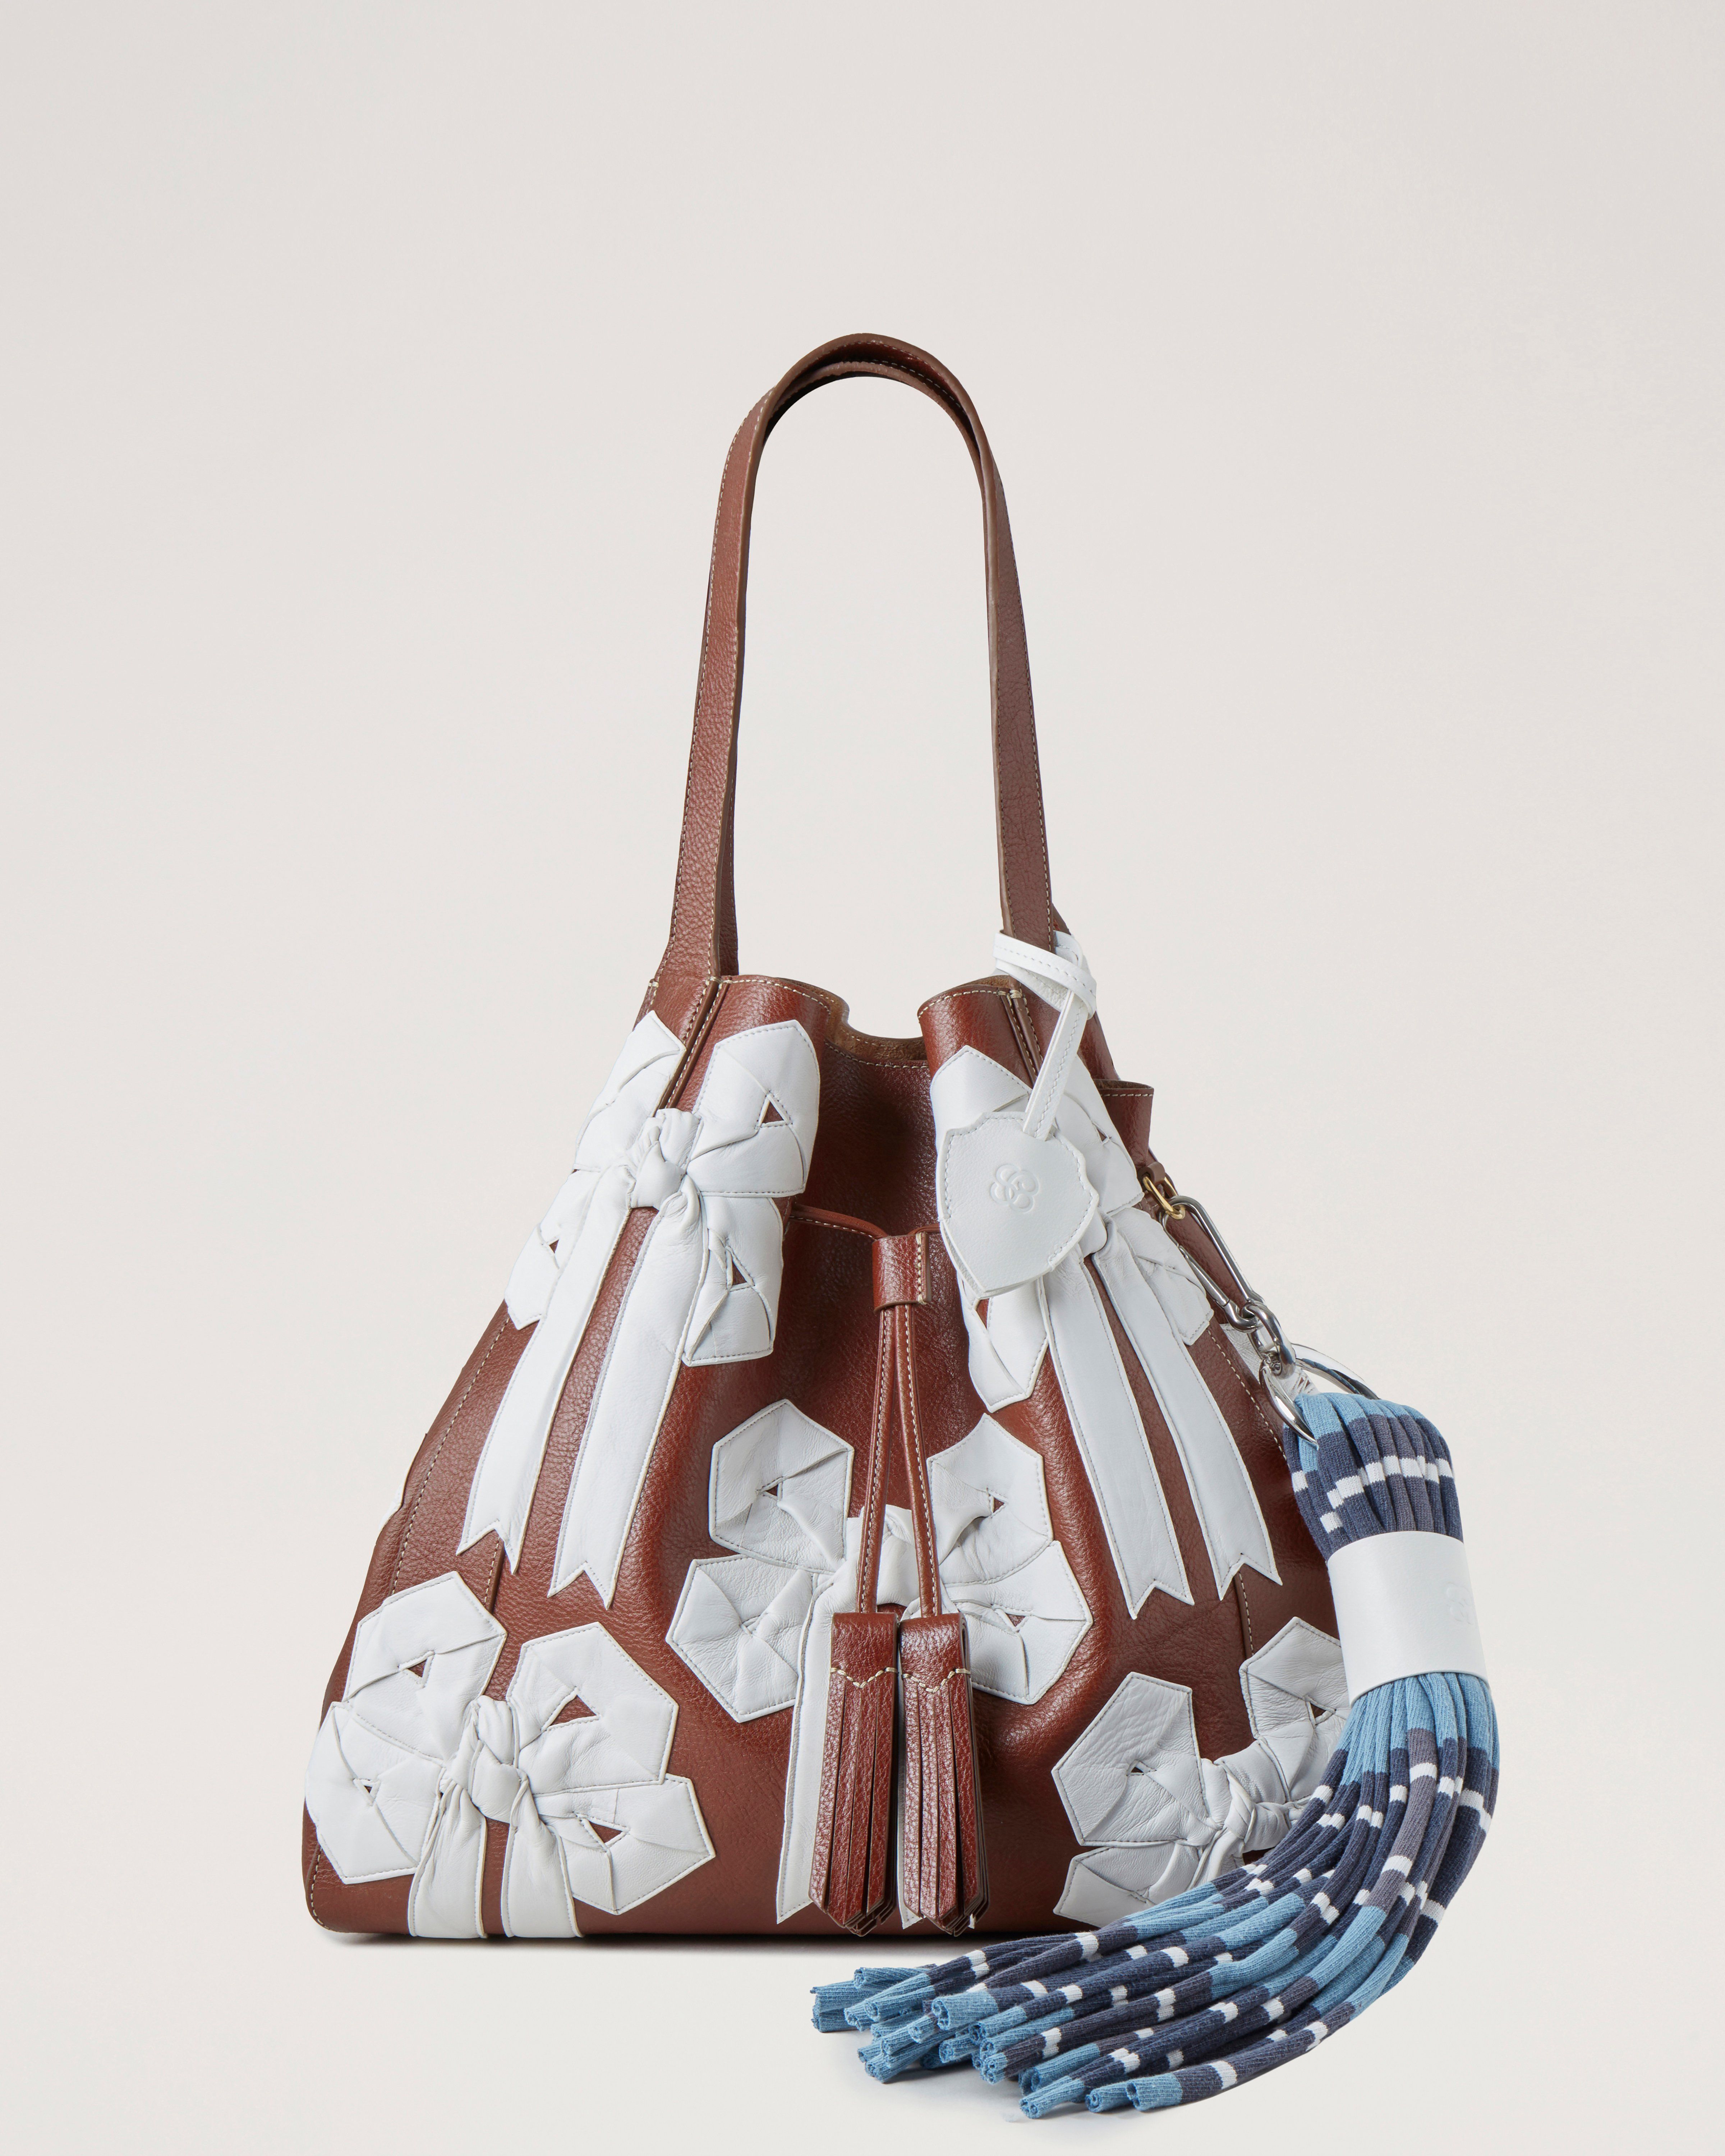 Millie Bow Handbag in Oak Leather from the Mulberry x Stefan Cooke collection